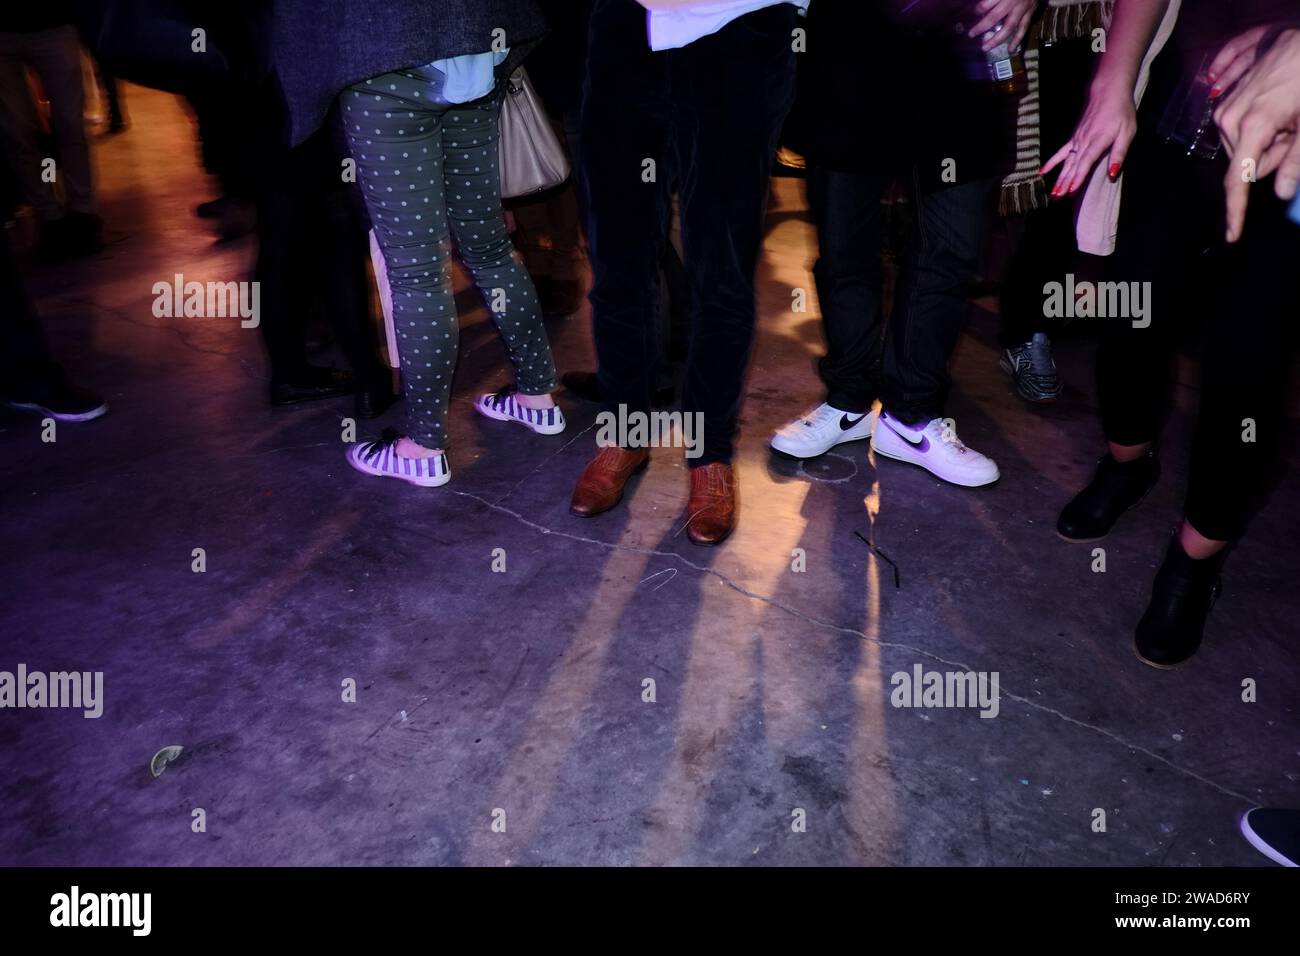 Legs, shoes, runners, sneakers, hands, jeans, pants, coloured light & shadows on a warehouse party dancefloor, nightlife in Sydney Stock Photo